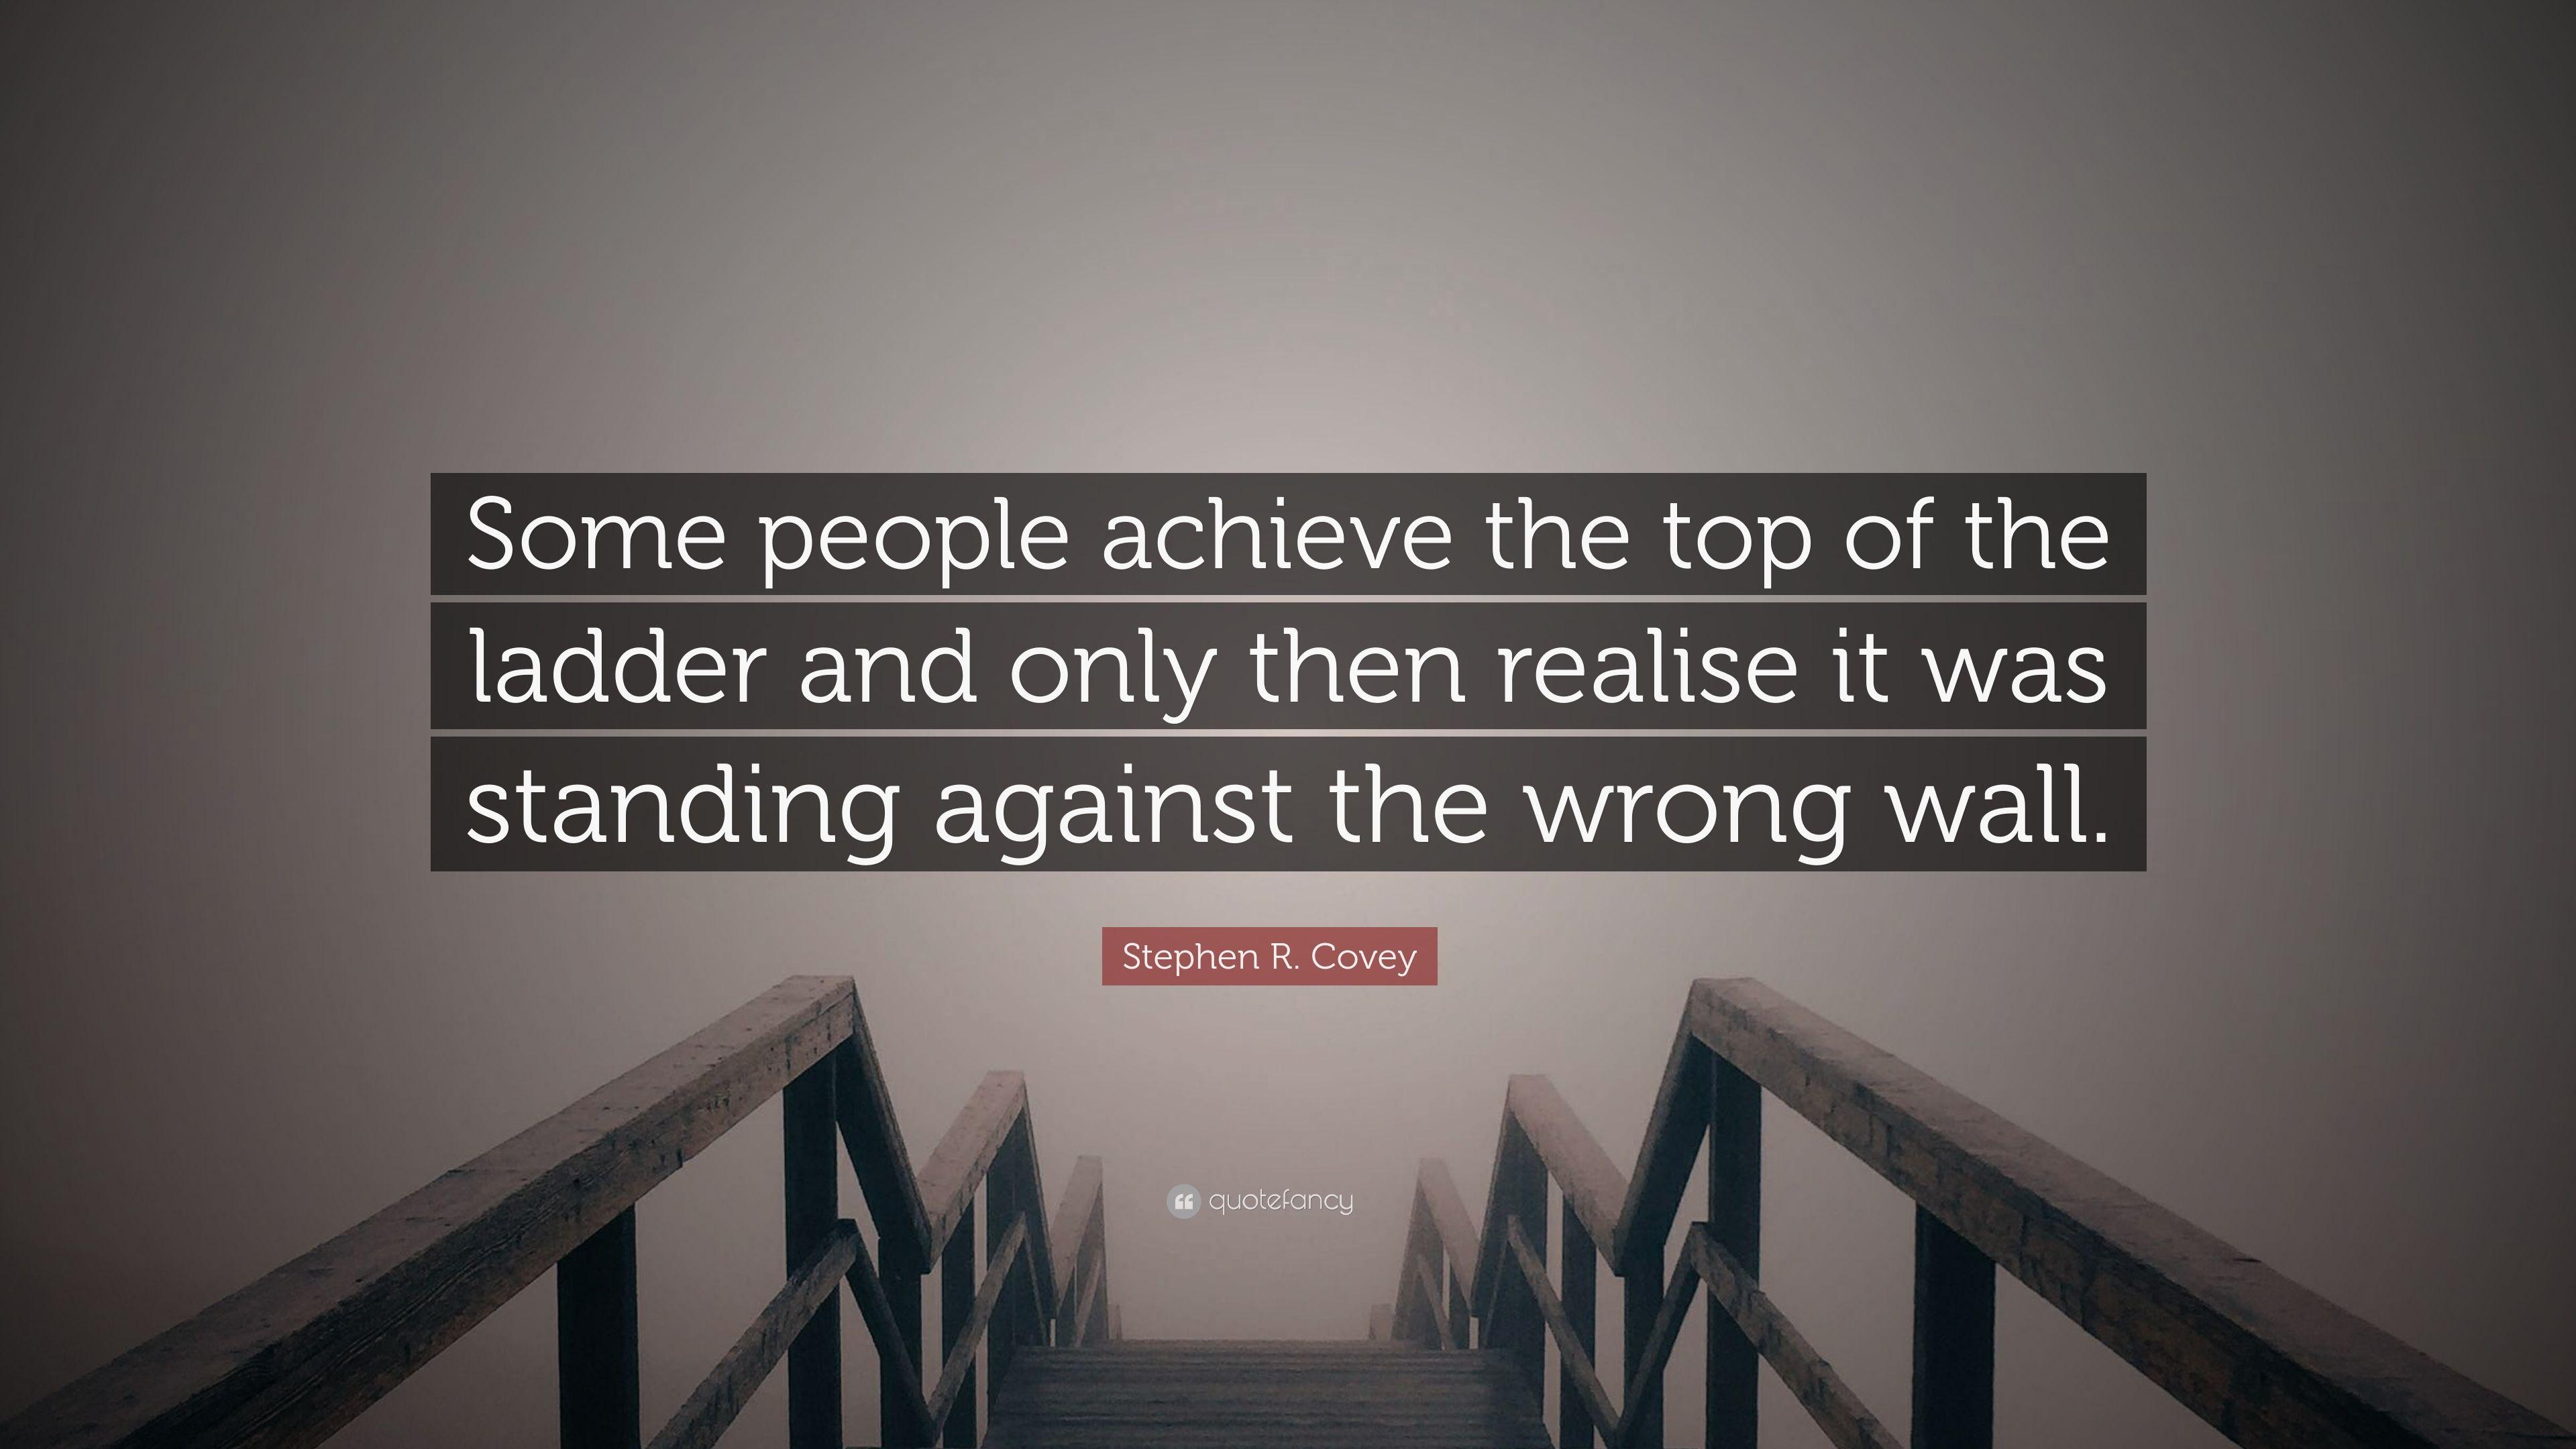 Stephen R. Covey Quote: “Some people achieve the top of the ladder